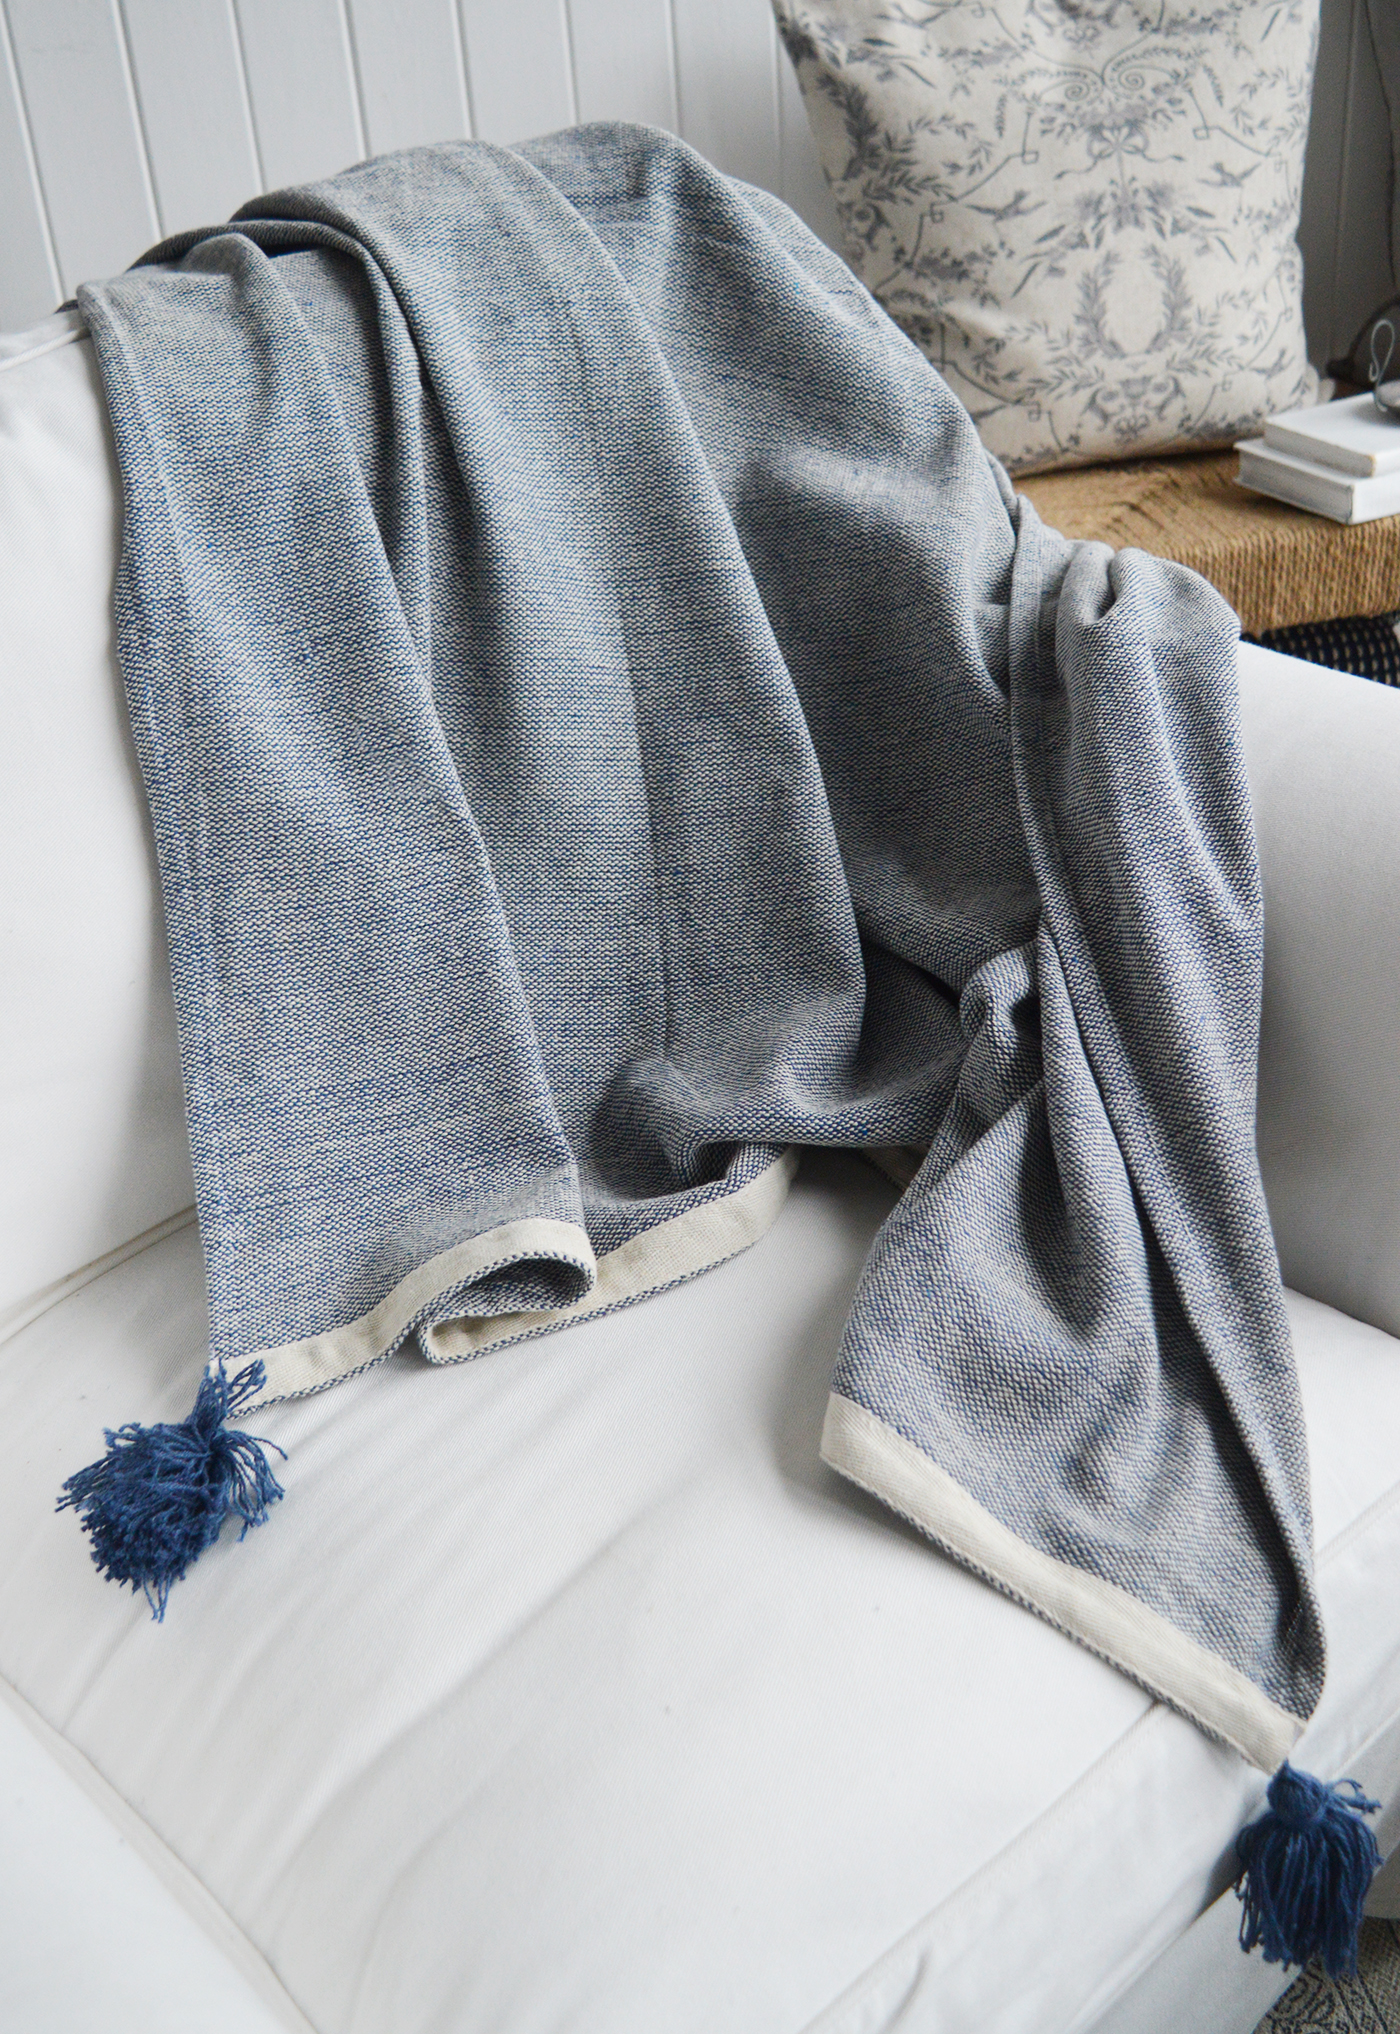 New England Style White Furniture and accessories for the home. Coastal, country and modern farmhouse interiors and furniture. Seabrook blue with Pom Pom throw and blankets